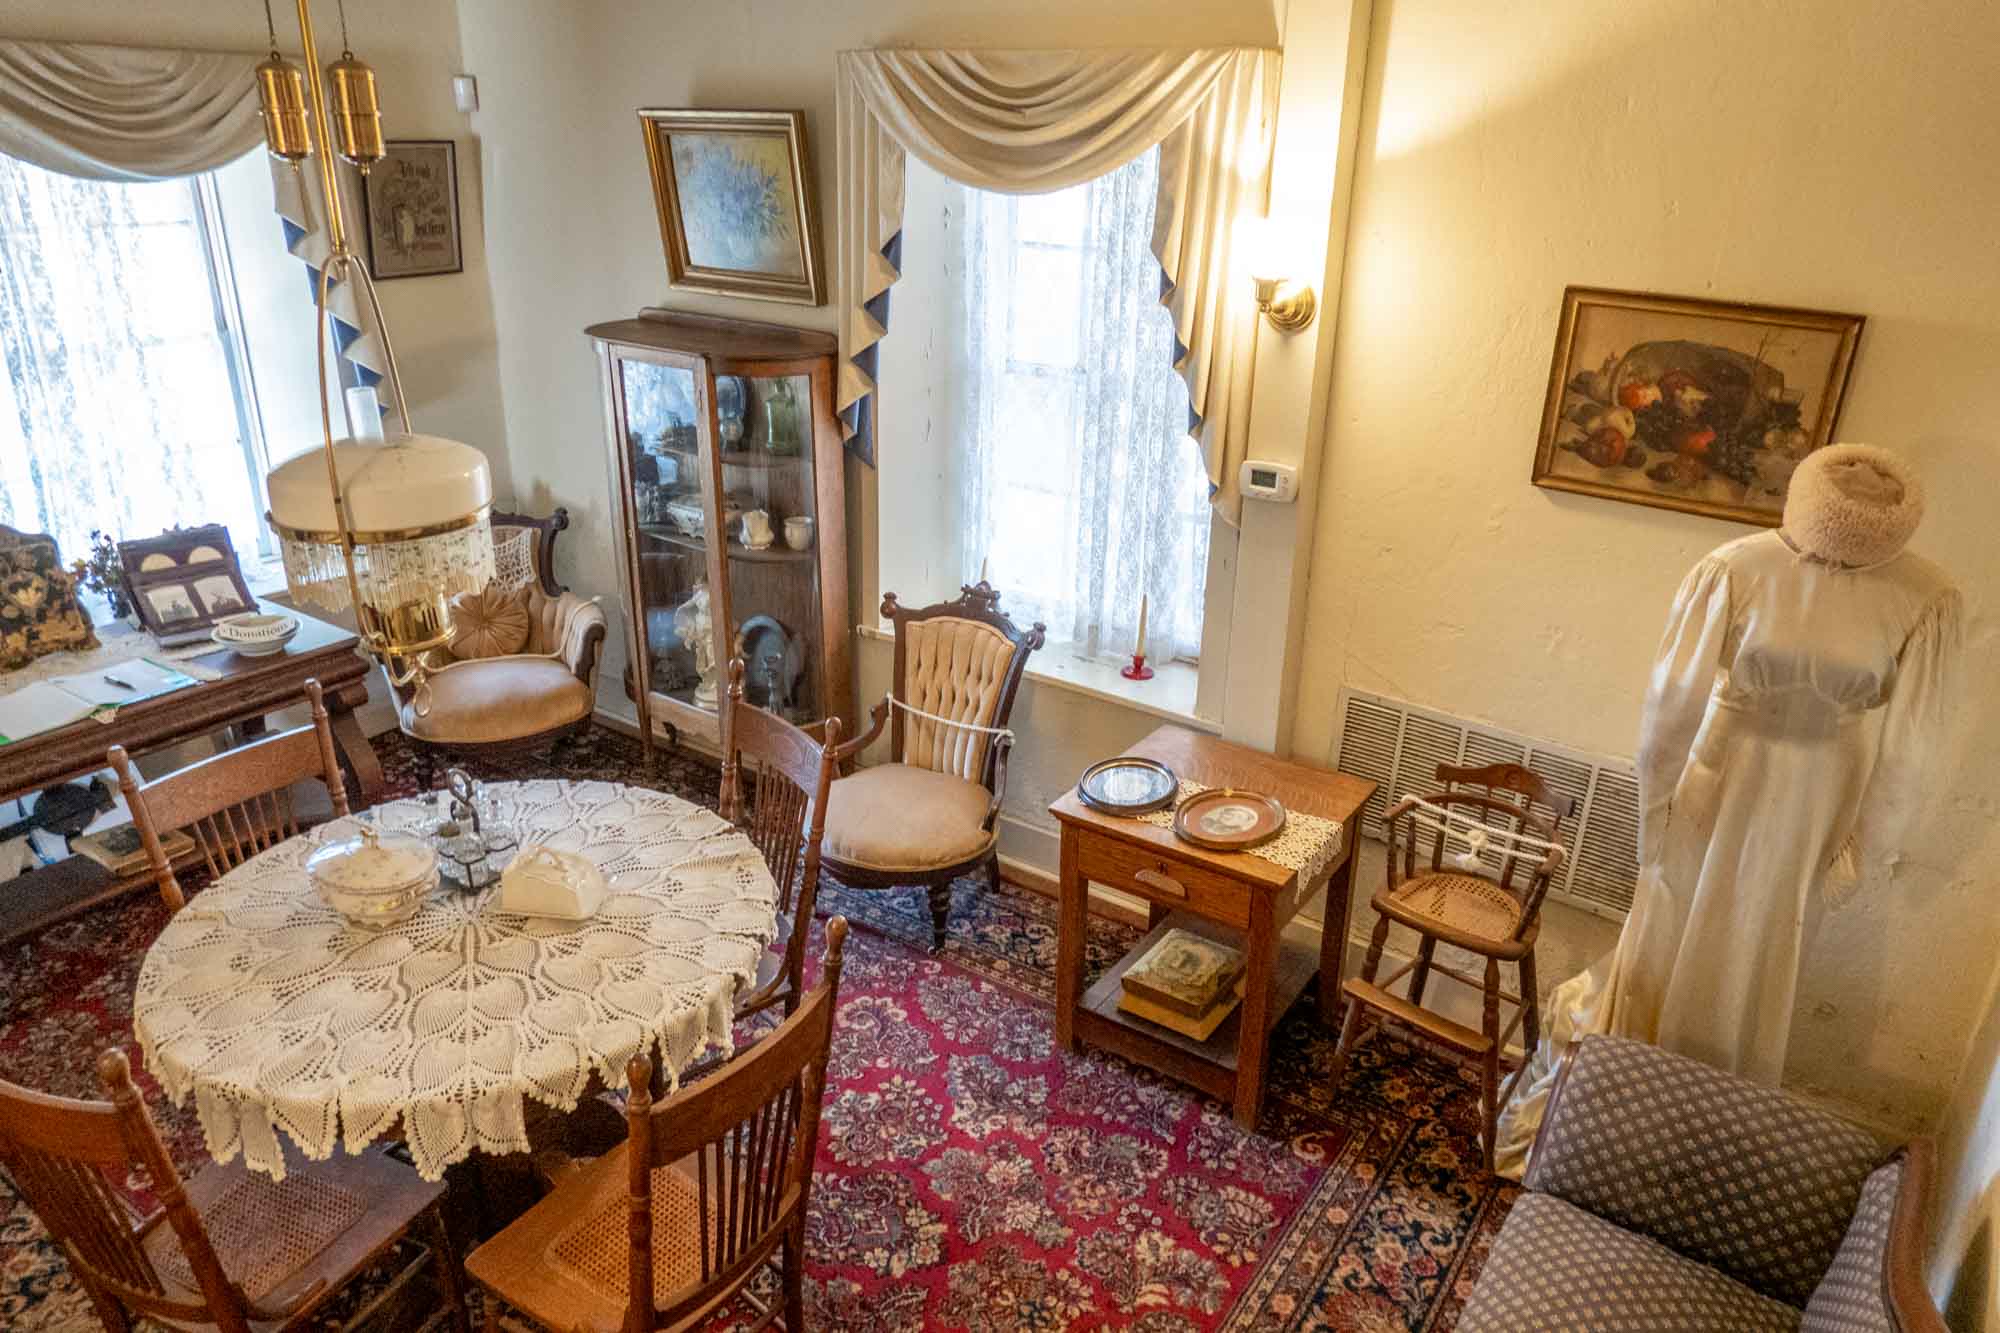 Room with antique table, chairs, dishes, and an old-fashioned white dress on display.